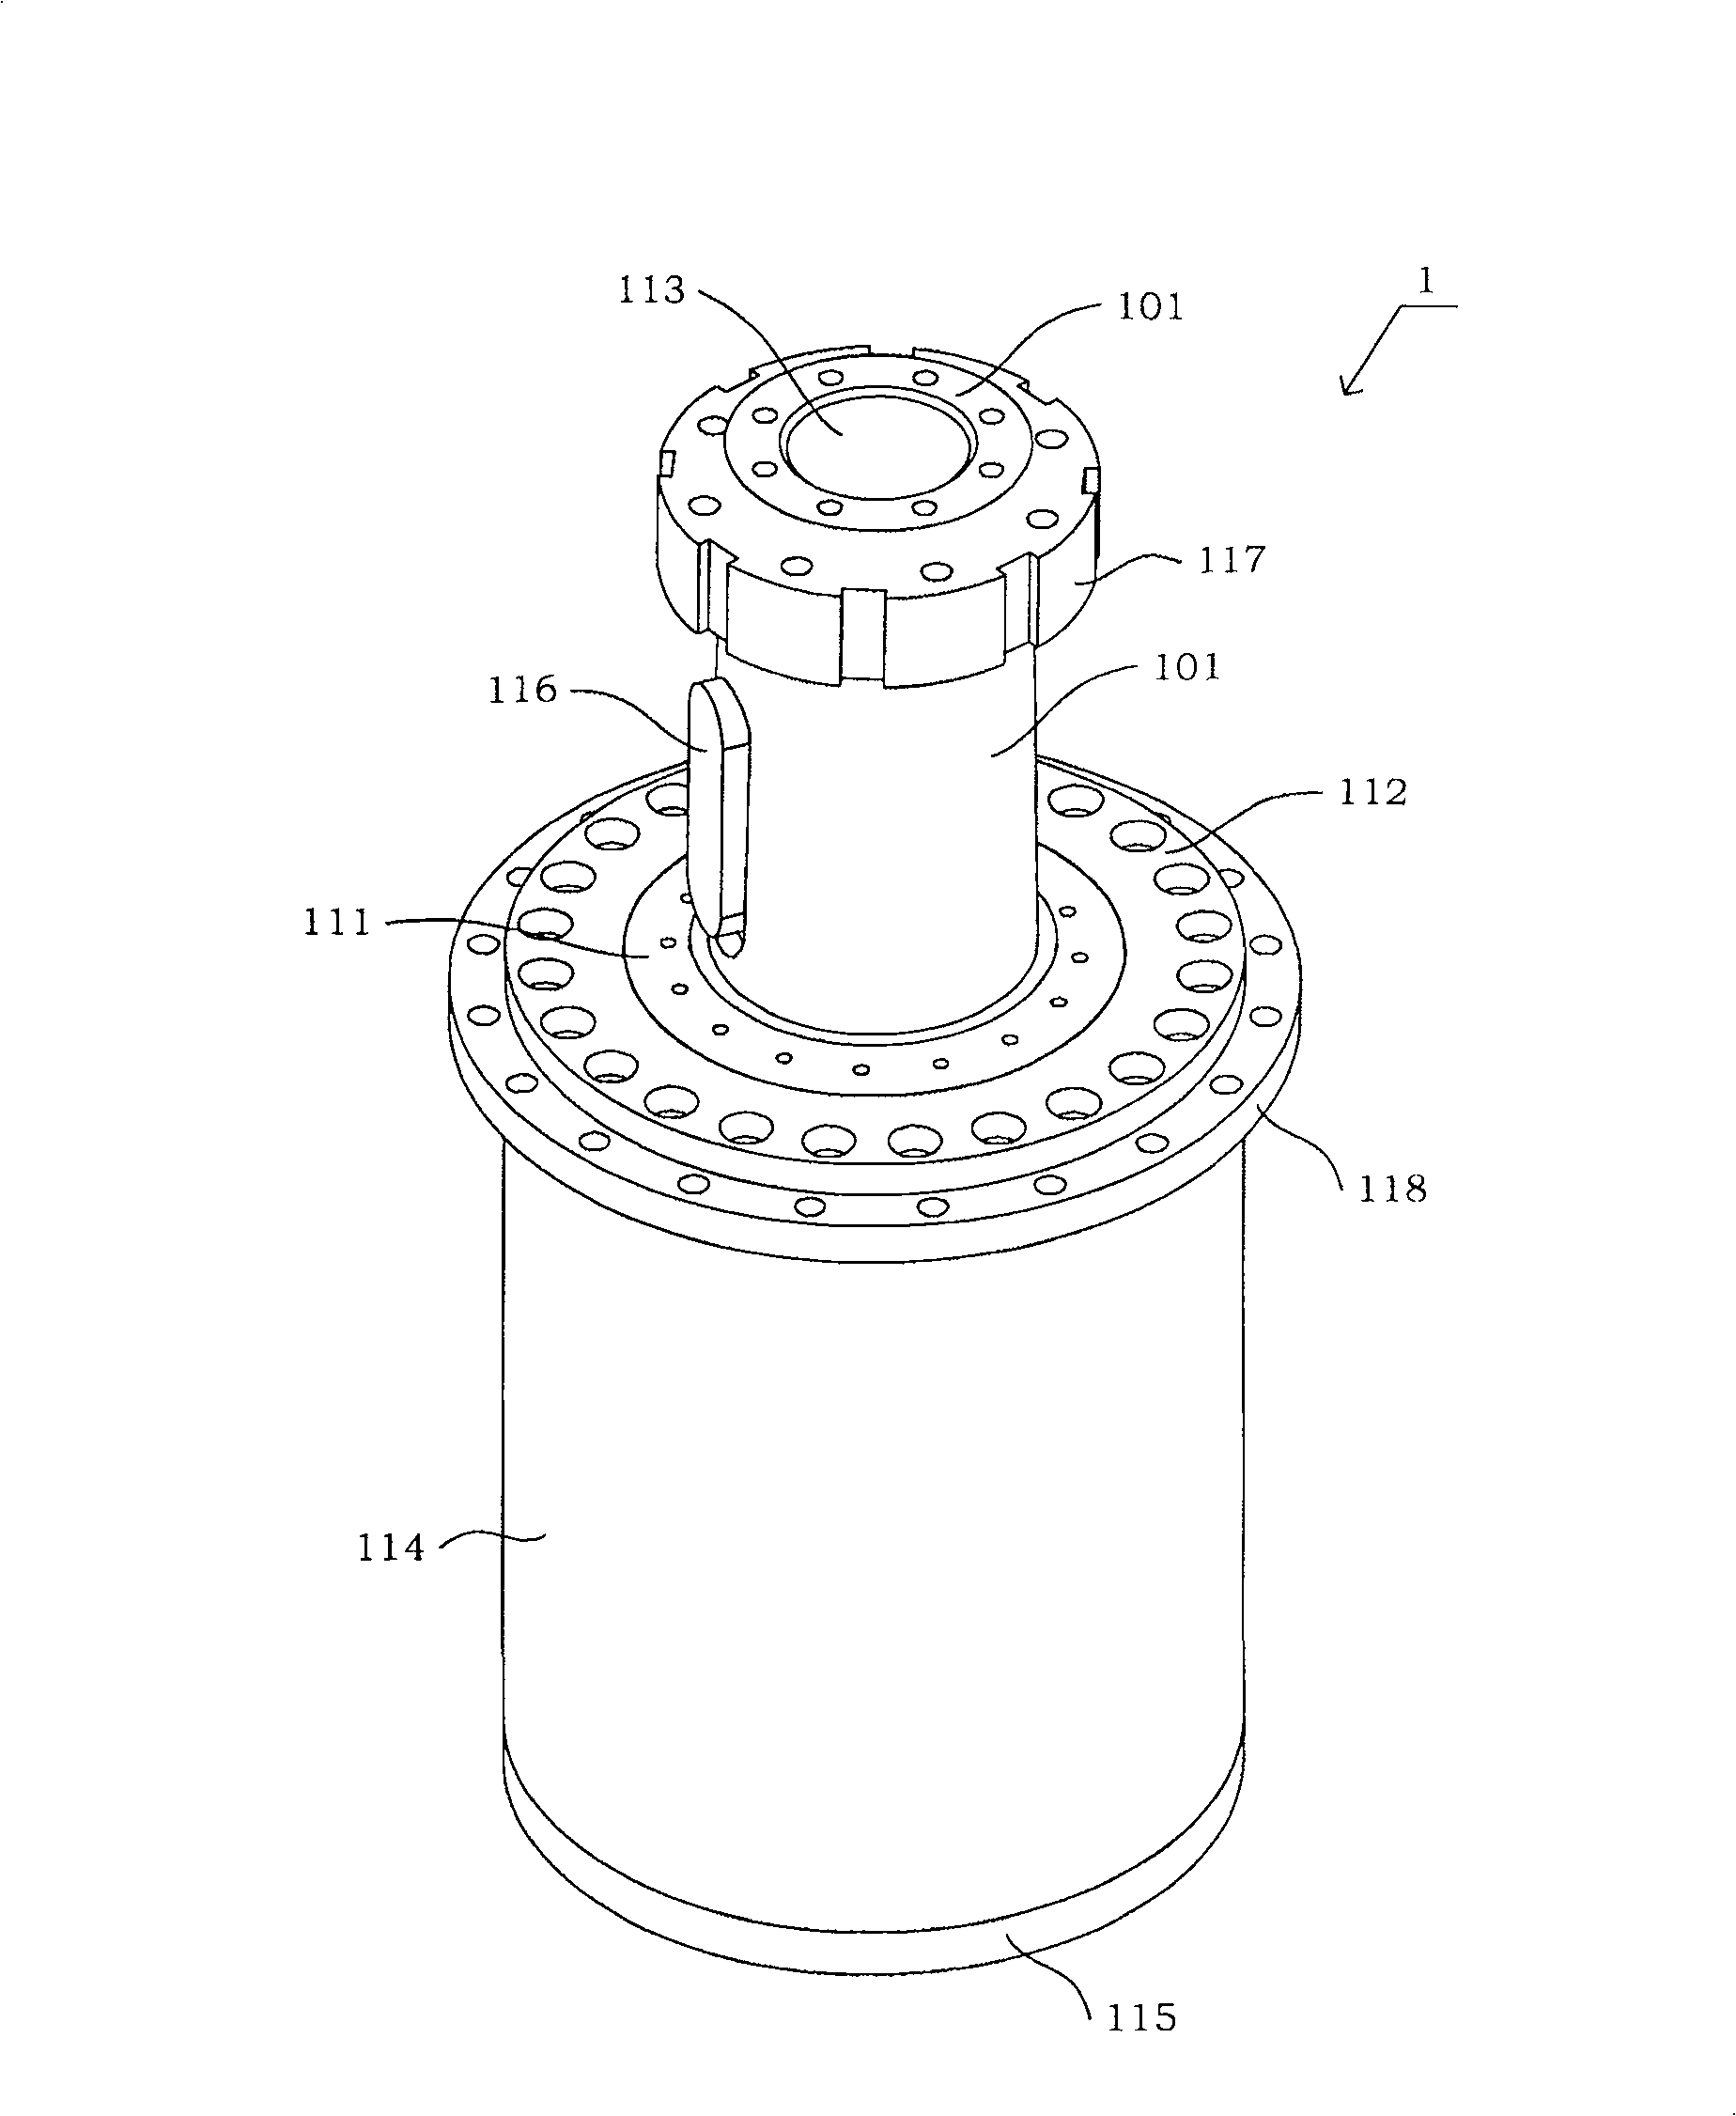 Principal shaft mechanism of two-position north seeker